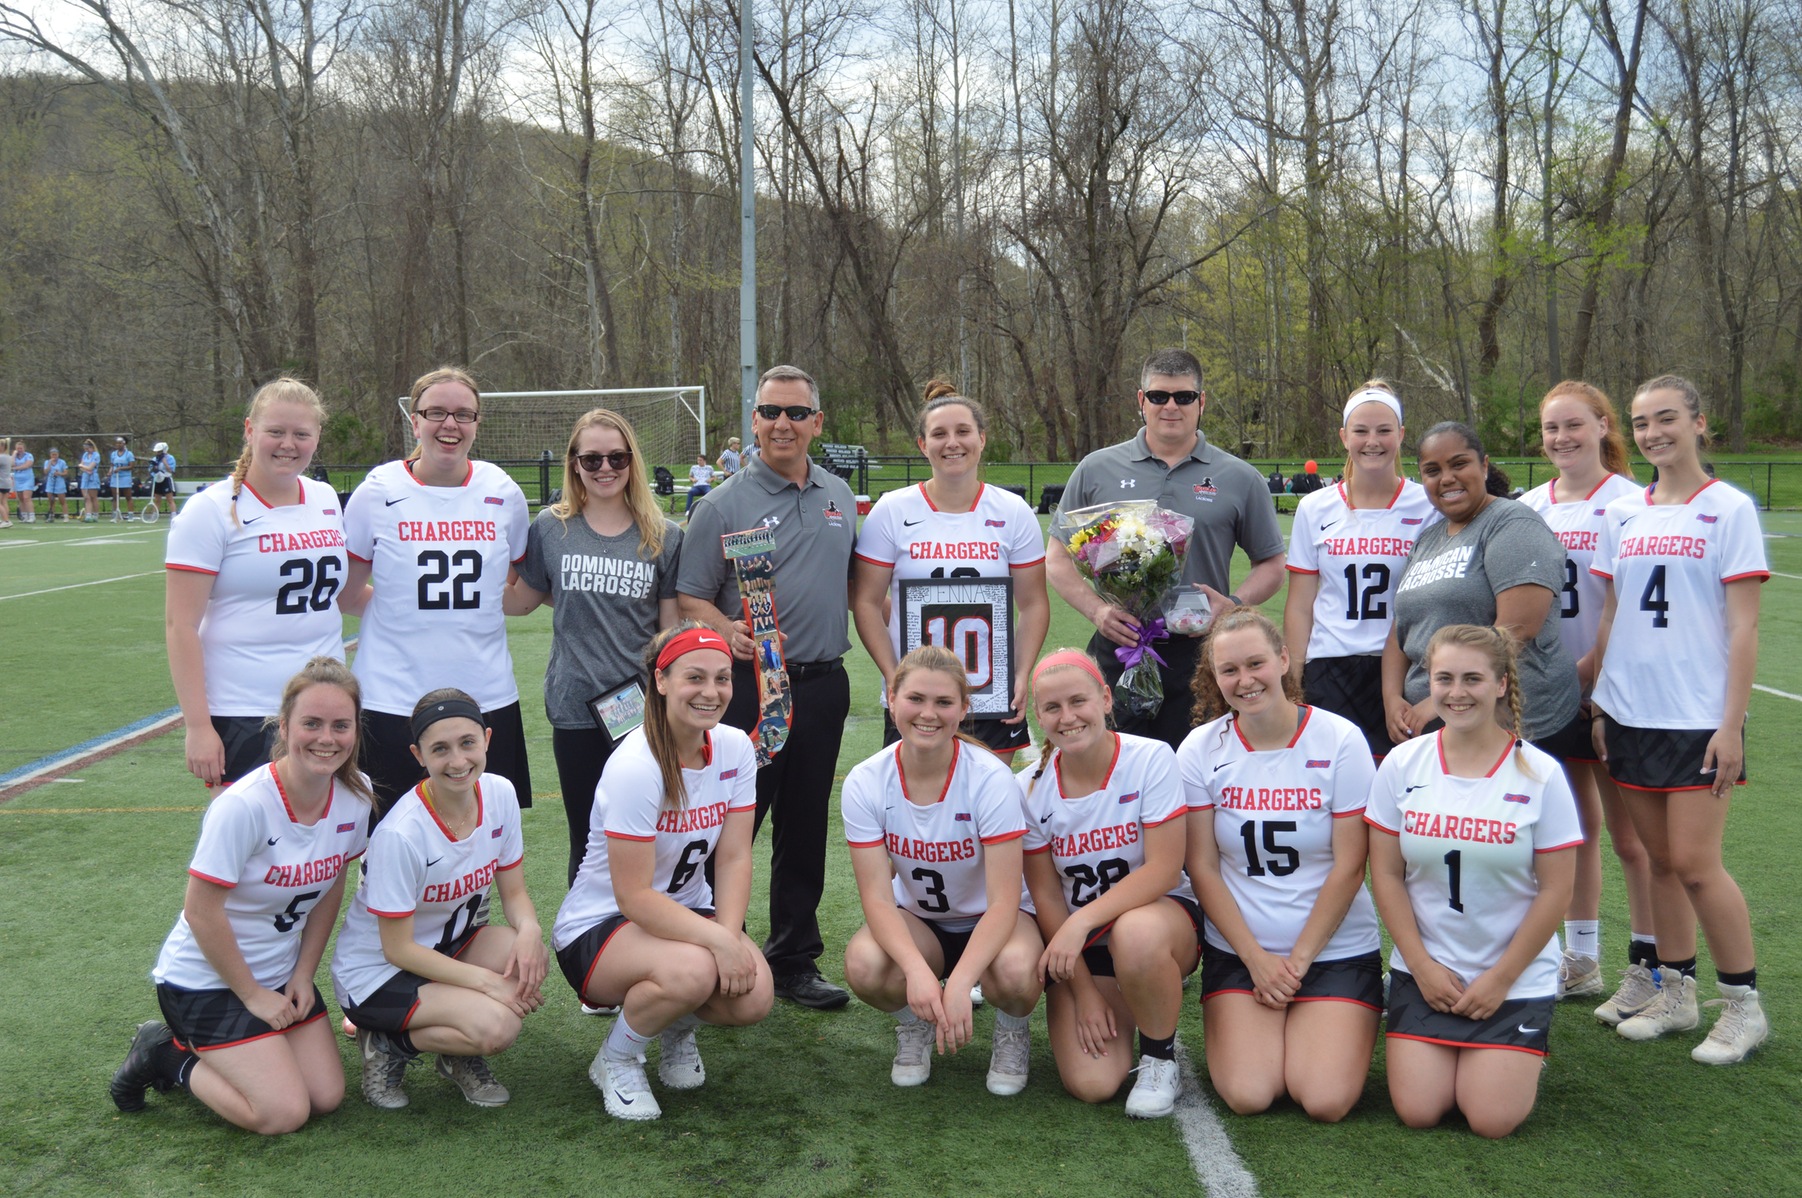 WOMEN'S LACROSSE DEFEATS HOLY FAMILY ON SENIOR DAY